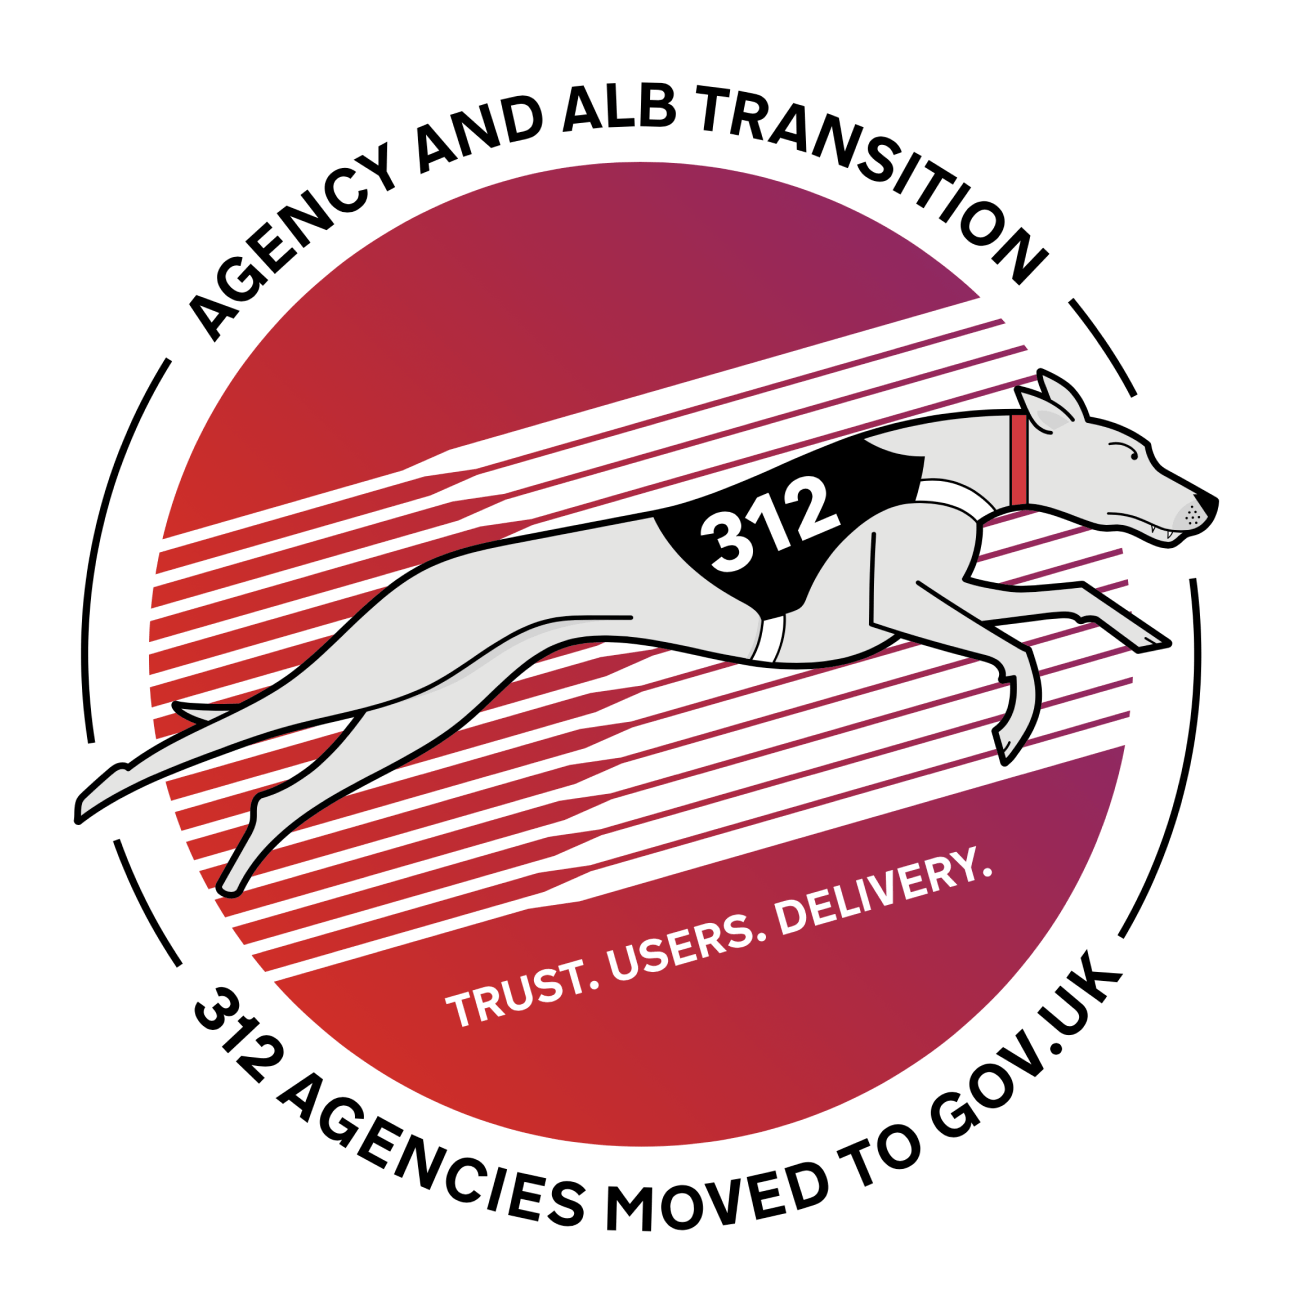 An illustrated mission patch for the Agency and Arms Length Bodies Transition team, showing a greyhound with the number 312 on its side.